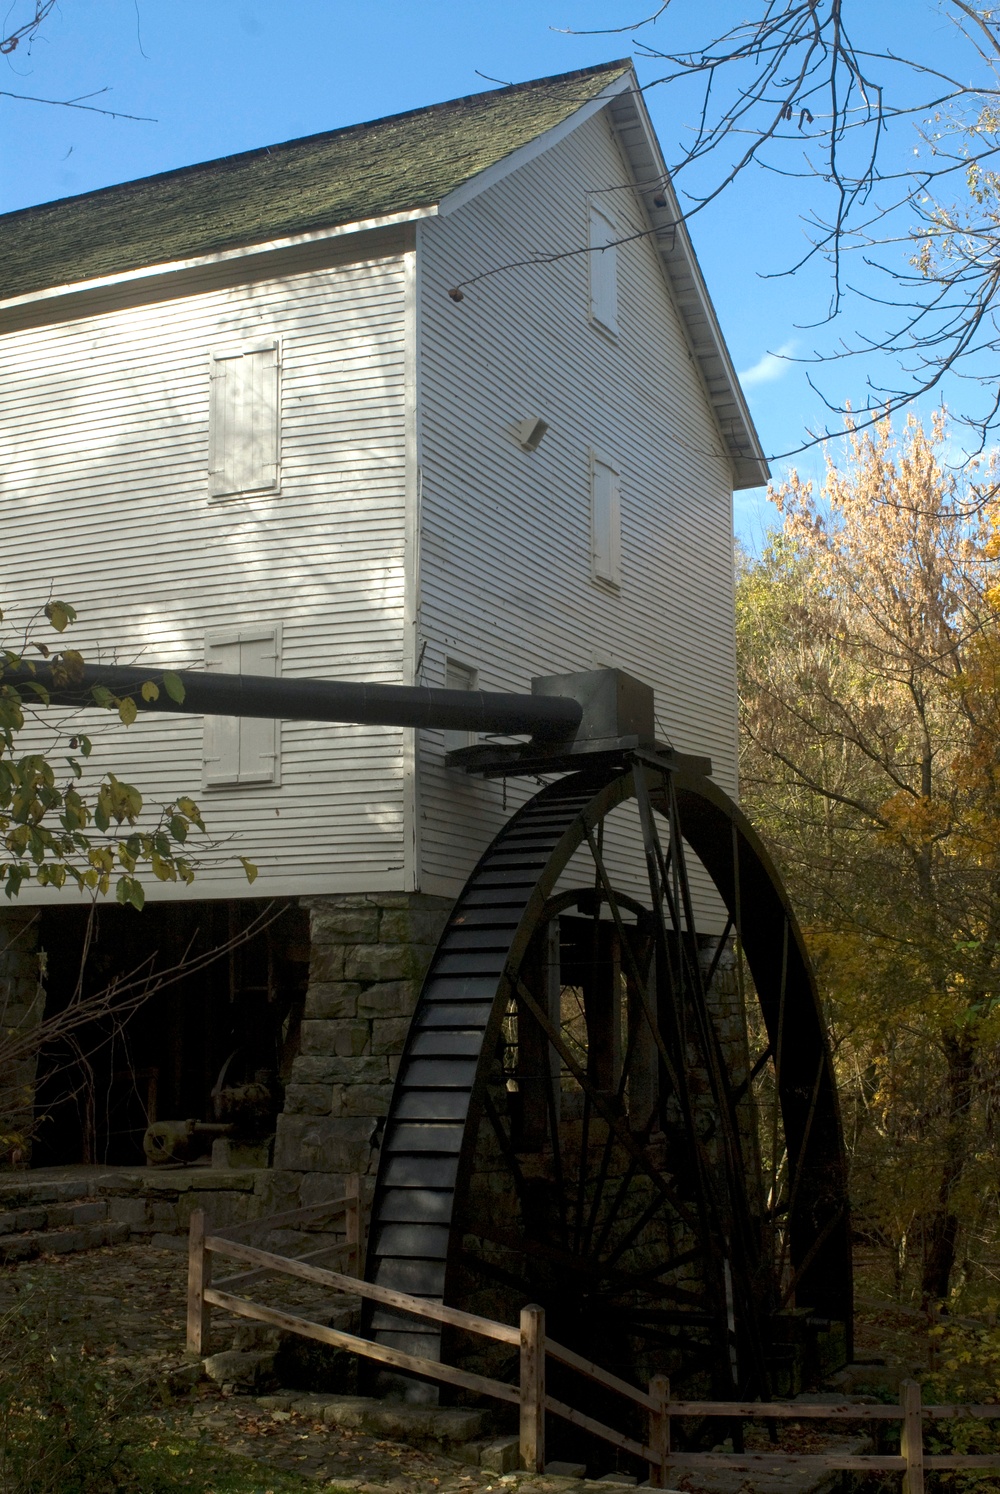 Public get historic treat at Corps gristmill